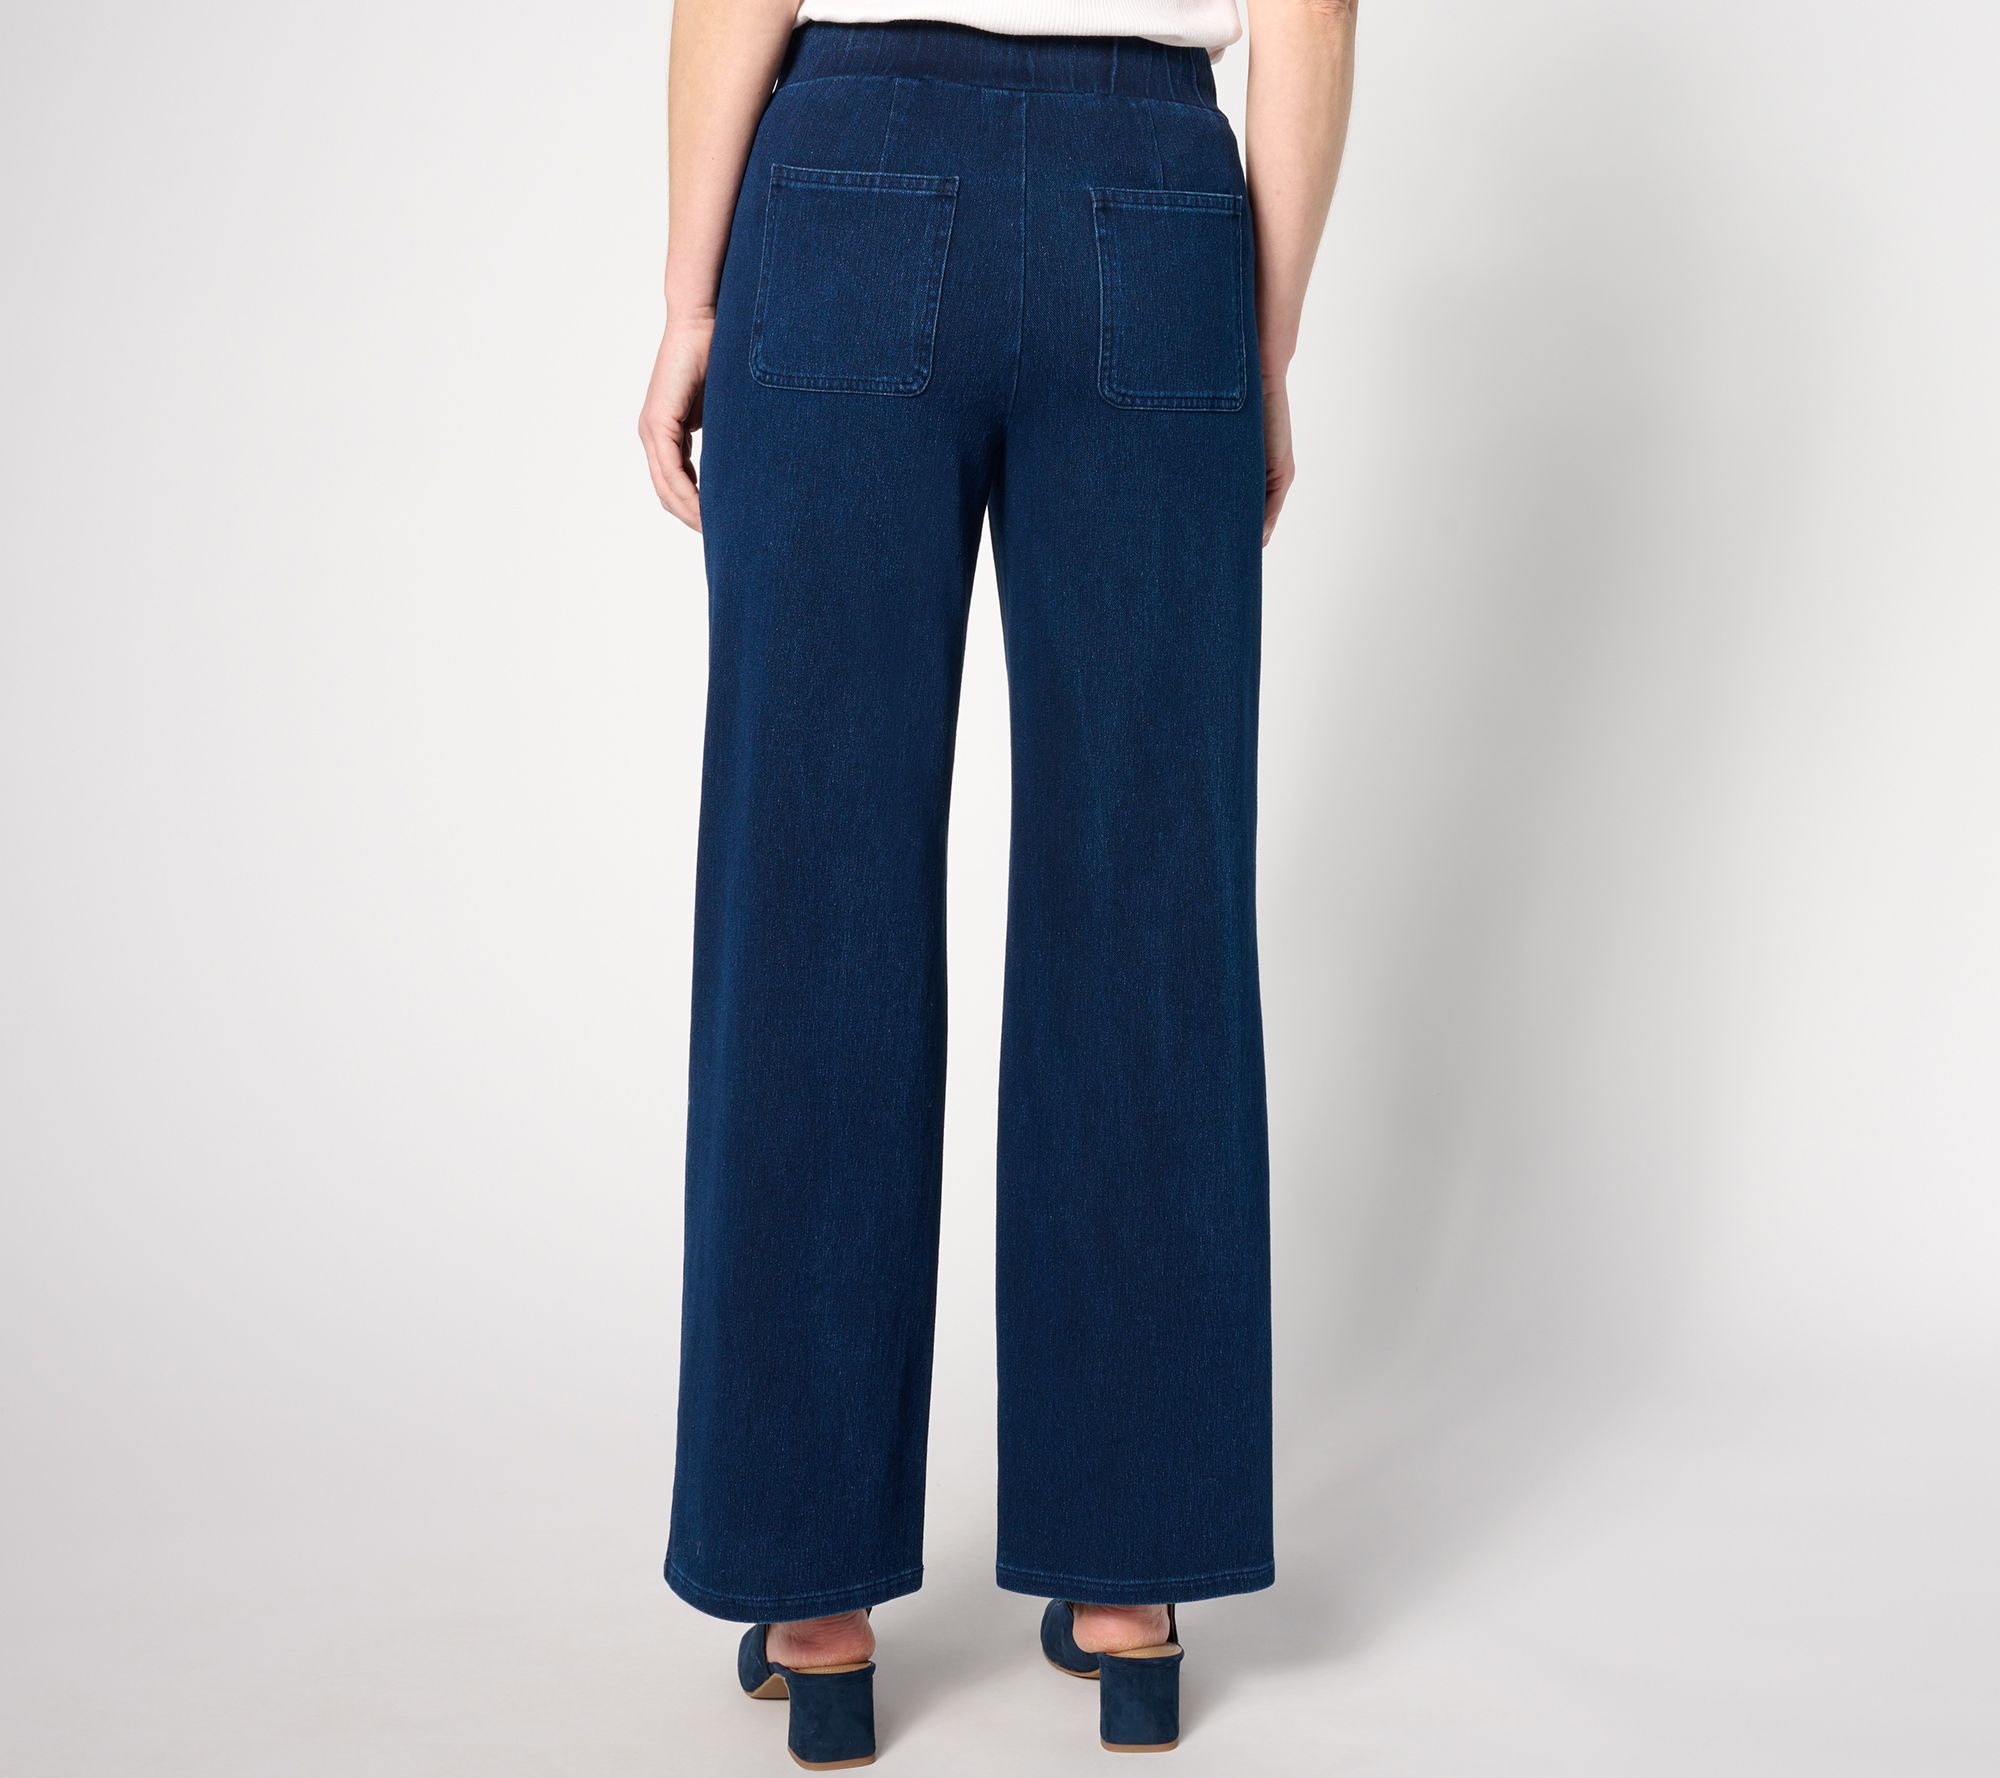 Denim & Co. Comfy Knit Wide-Leg Pant with Smooth Waist 